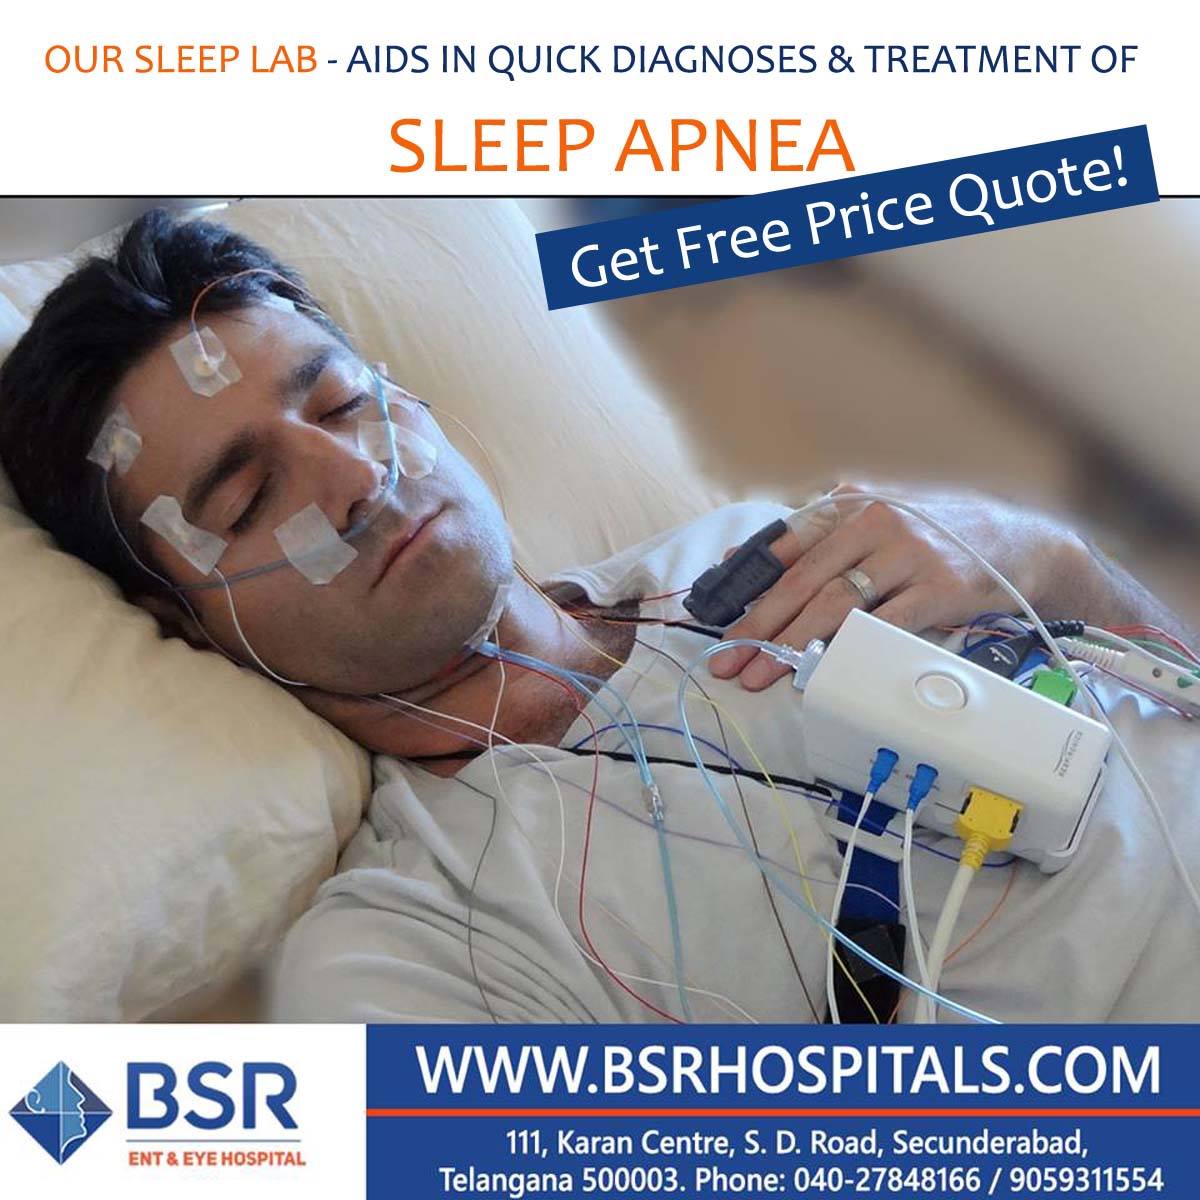 Are you looking for Sleep Apnea Treatment in Hyderabad?
Visit: bit.do/SleepApnea25
BSR ENT Hospital, provides quality treatment at affordable price
#SleepApnea #SleepApneaTreatment #SleepApneaTreatmentHyderabad